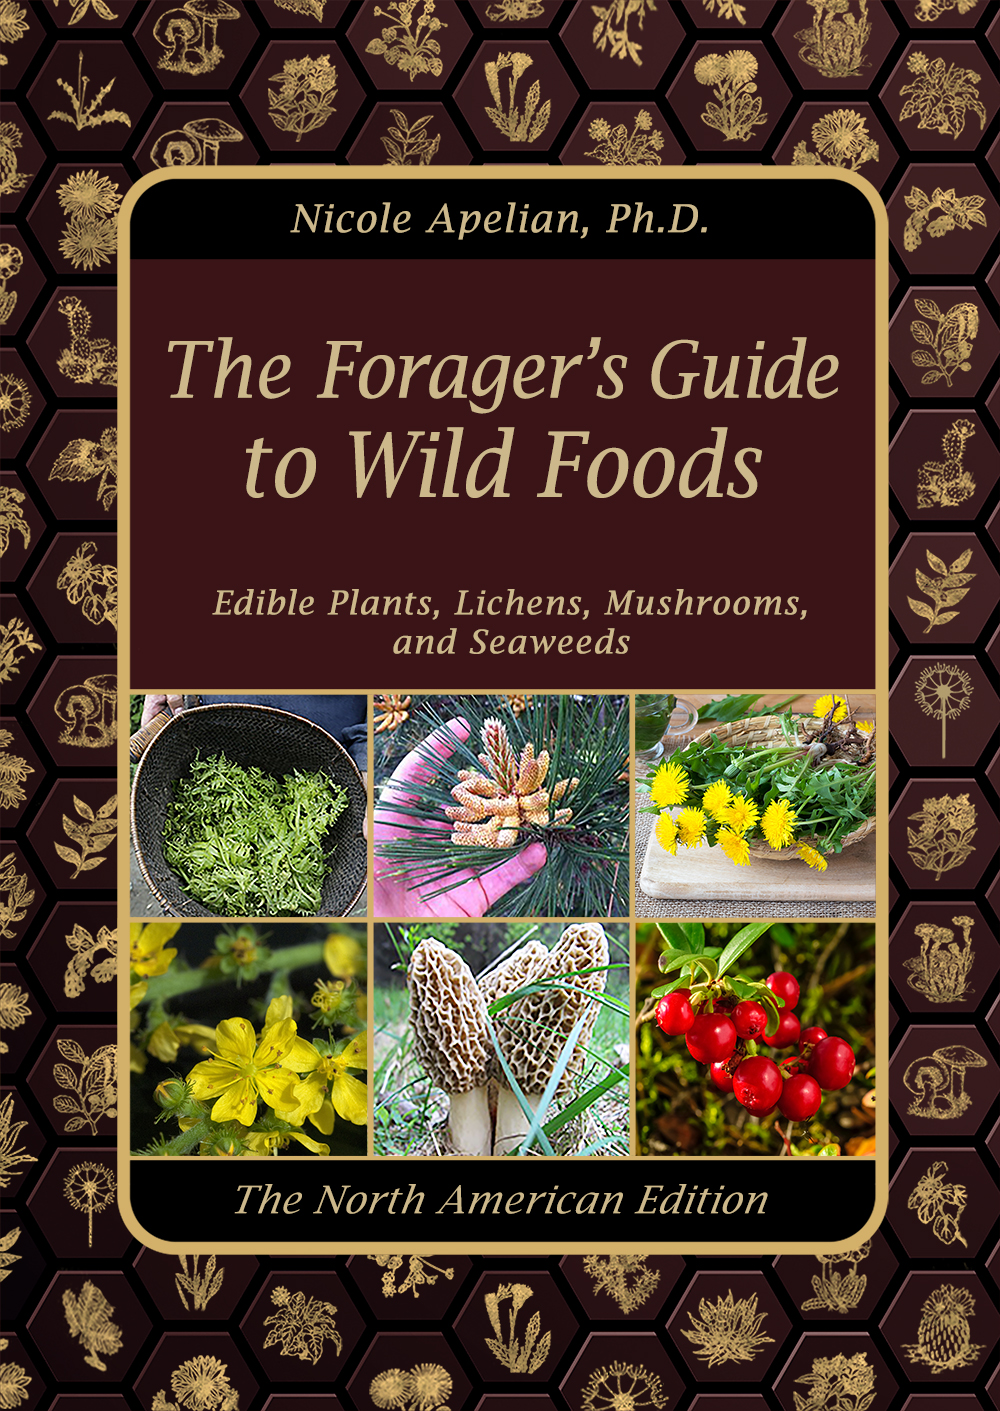 The Forager’s Guide to Wild Foods: Edible Plants, Lichens, Mushrooms, and Seaweed